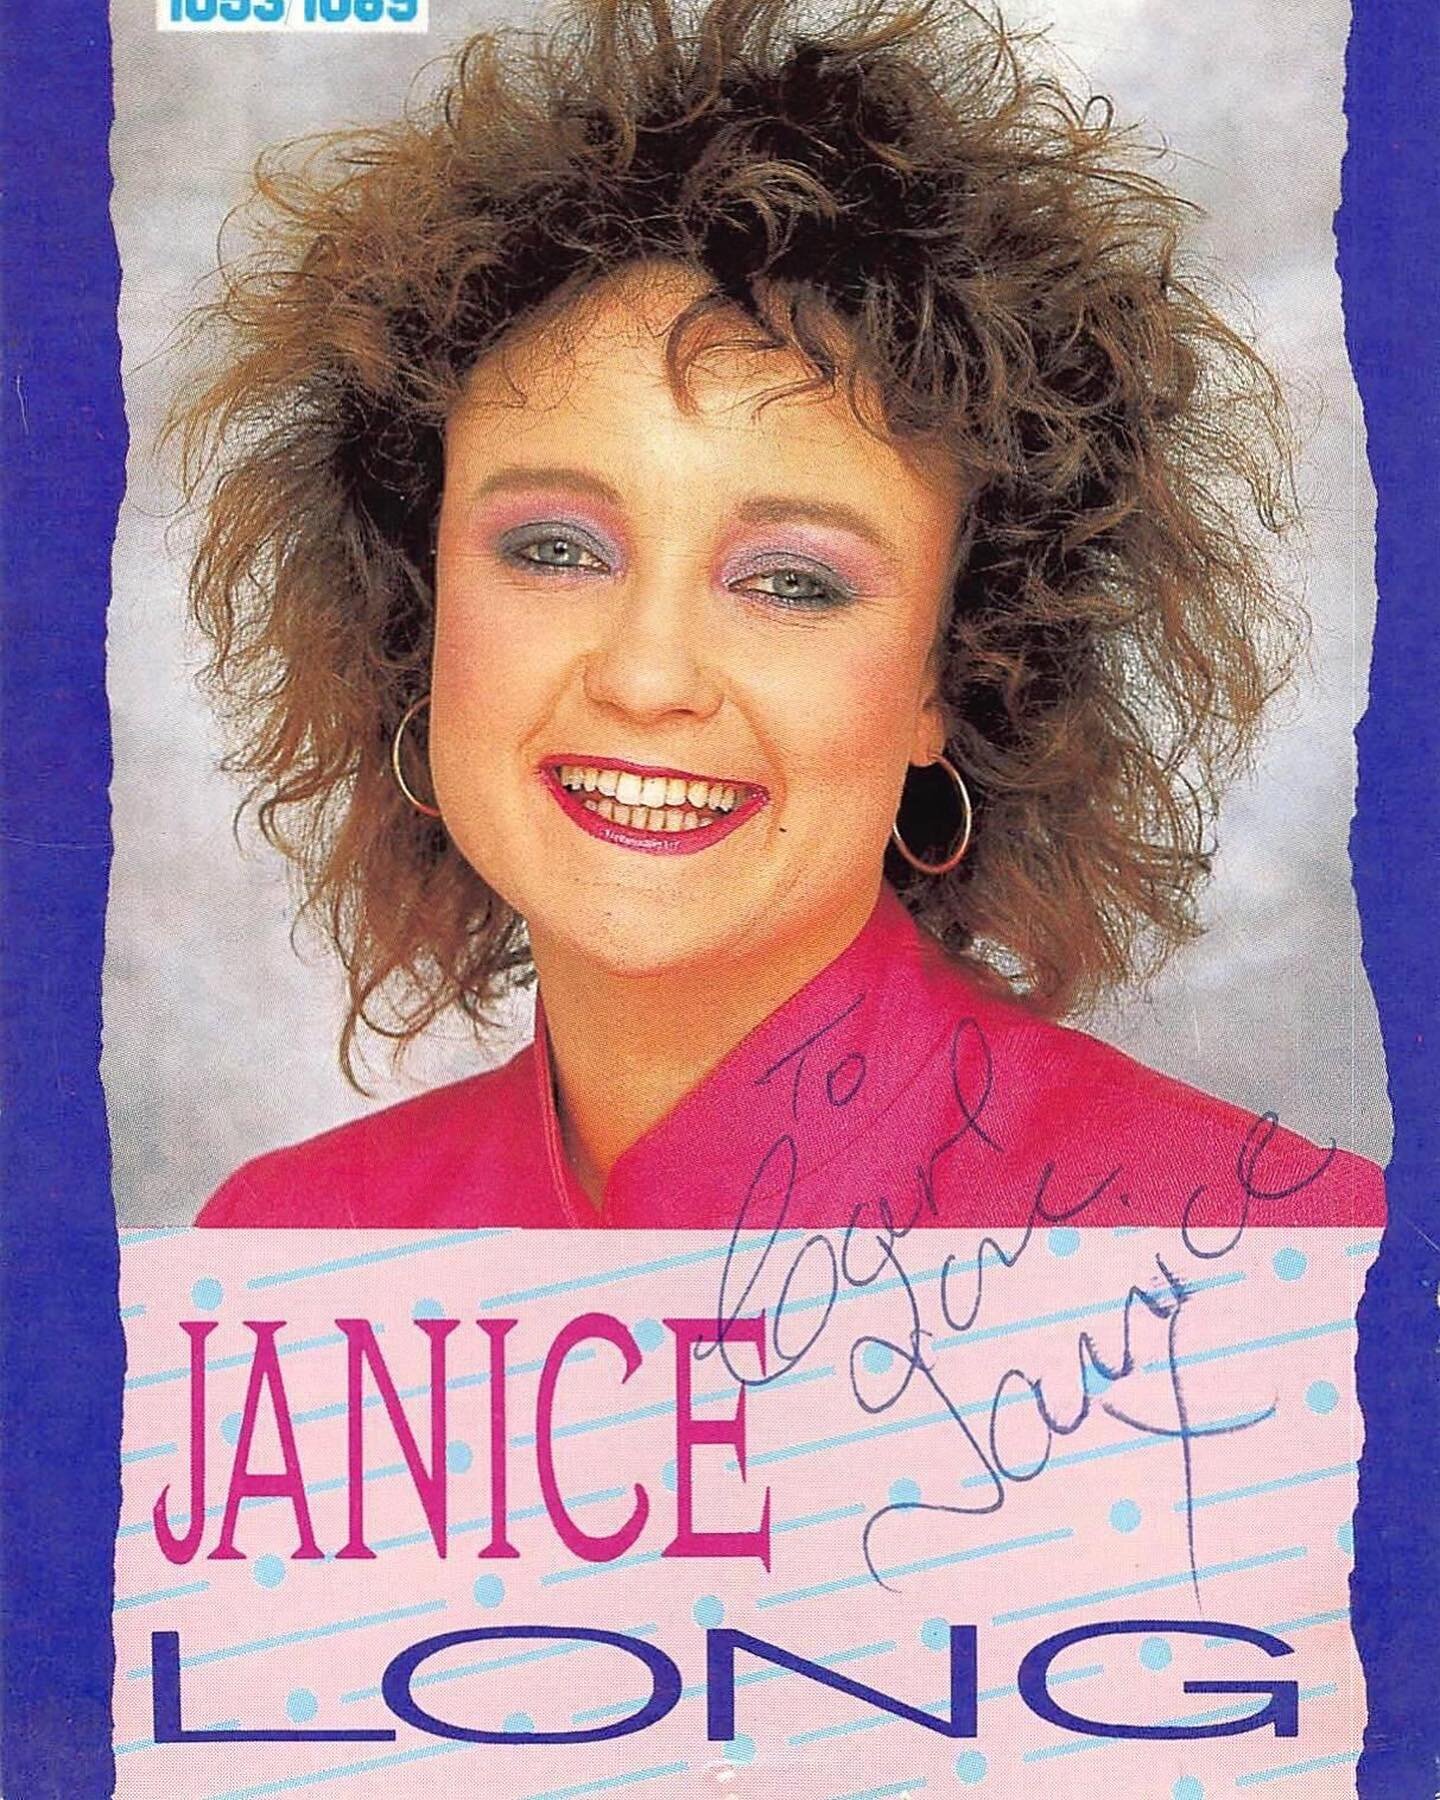 I started life as a bingo caller before becoming a DJ. I worked alongside some great people, including this pioneer&hellip; Janice Long. Her short life proves this to me - life is for living, it owes you nothing. So live every ounce of life you have,